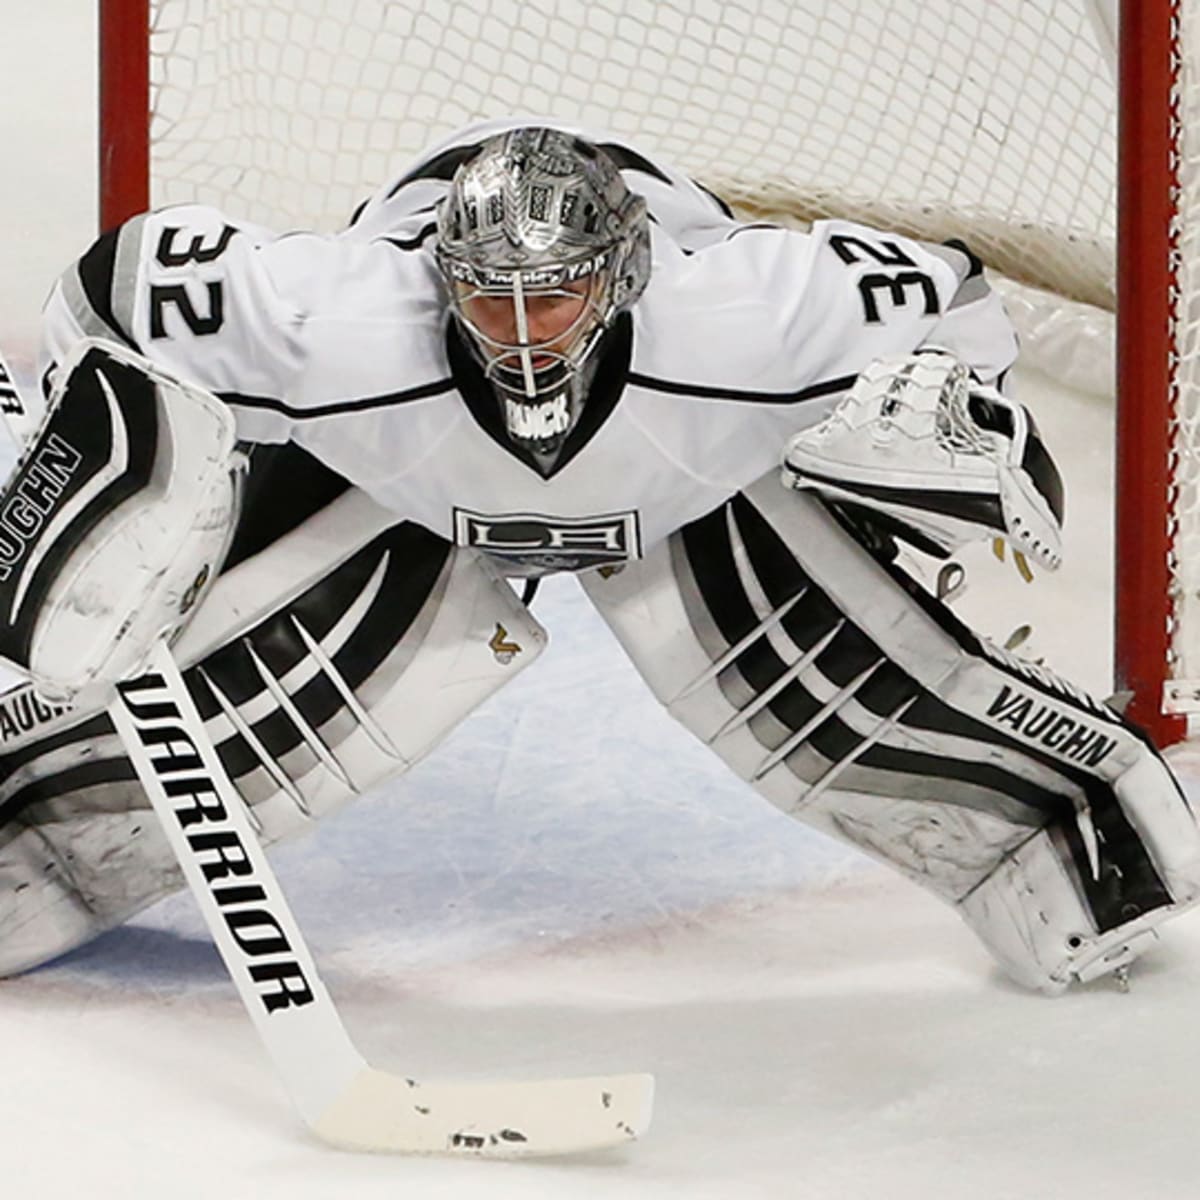 Kings' Jonathan Quick isn't ready to stop fighting for wins - Los